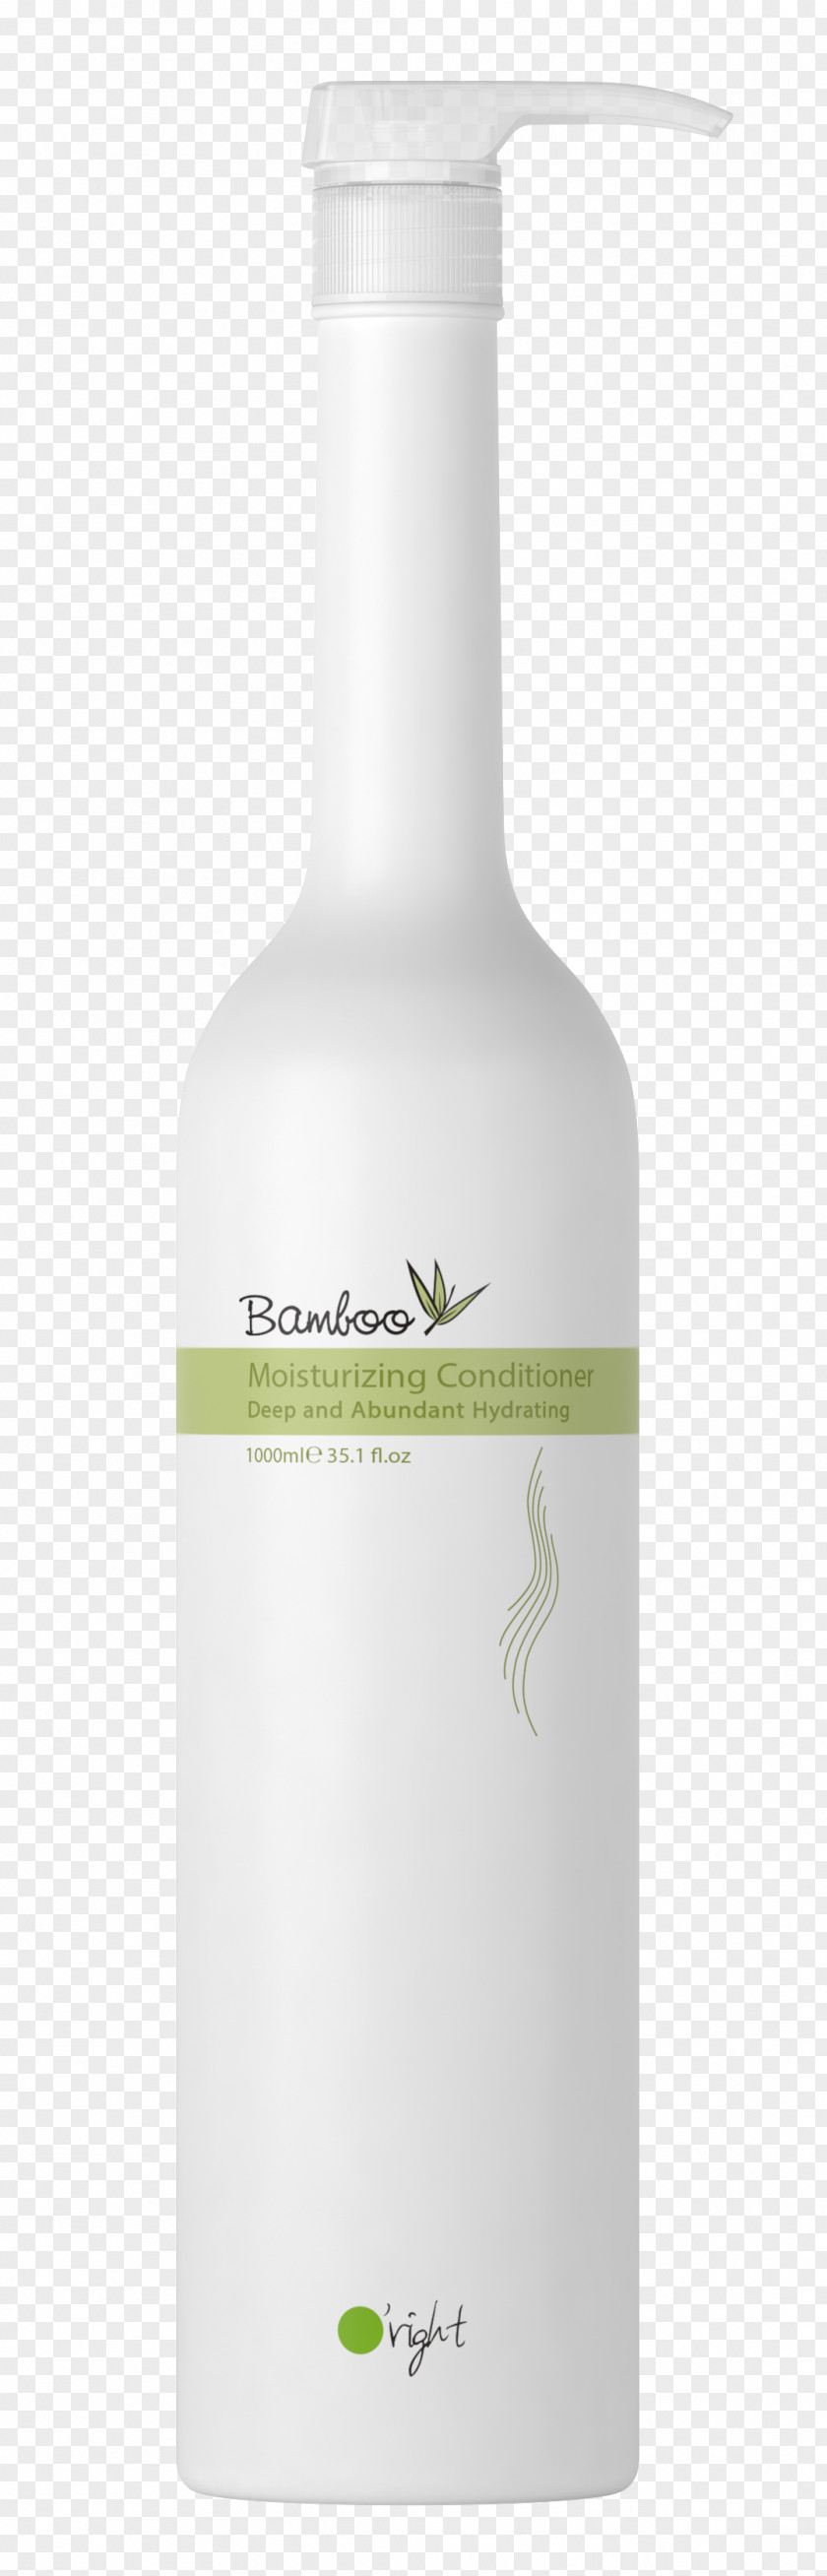 Hair Lotion Cosmetics Conditioner Moisturizer PNG